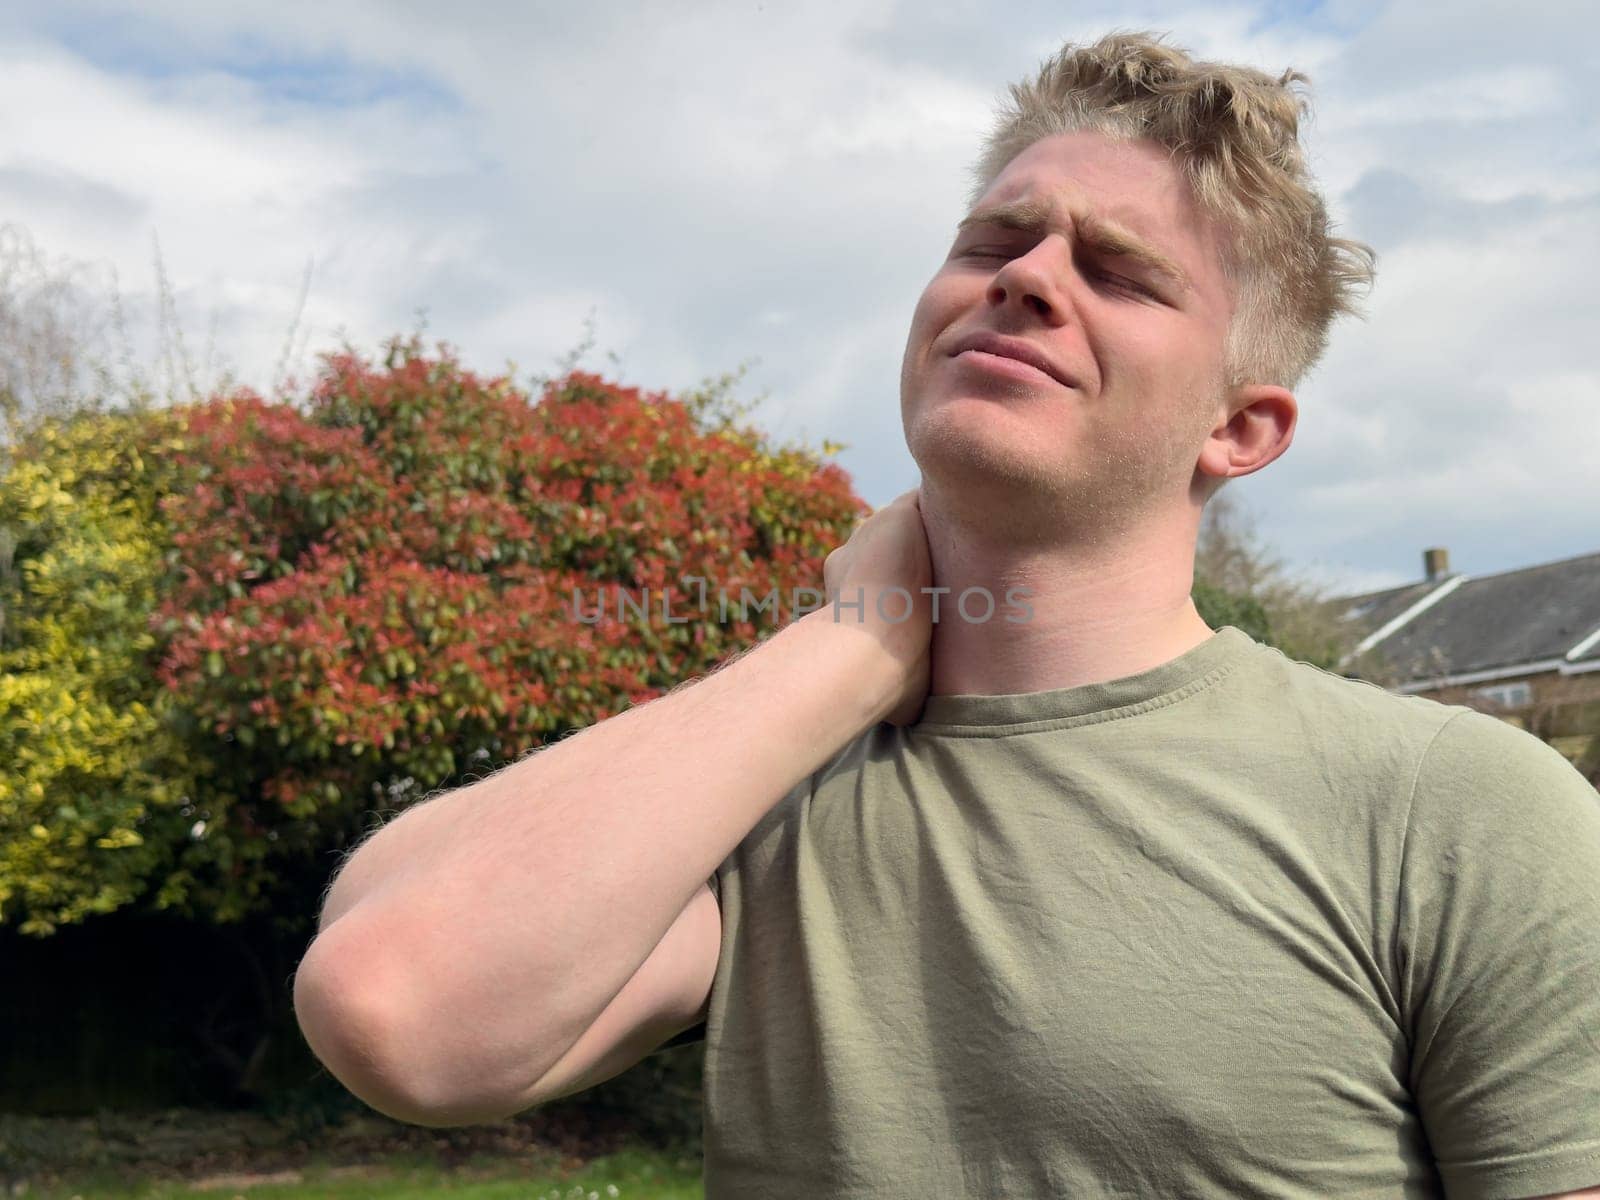 Young man massaging his aching neck standing outdoors